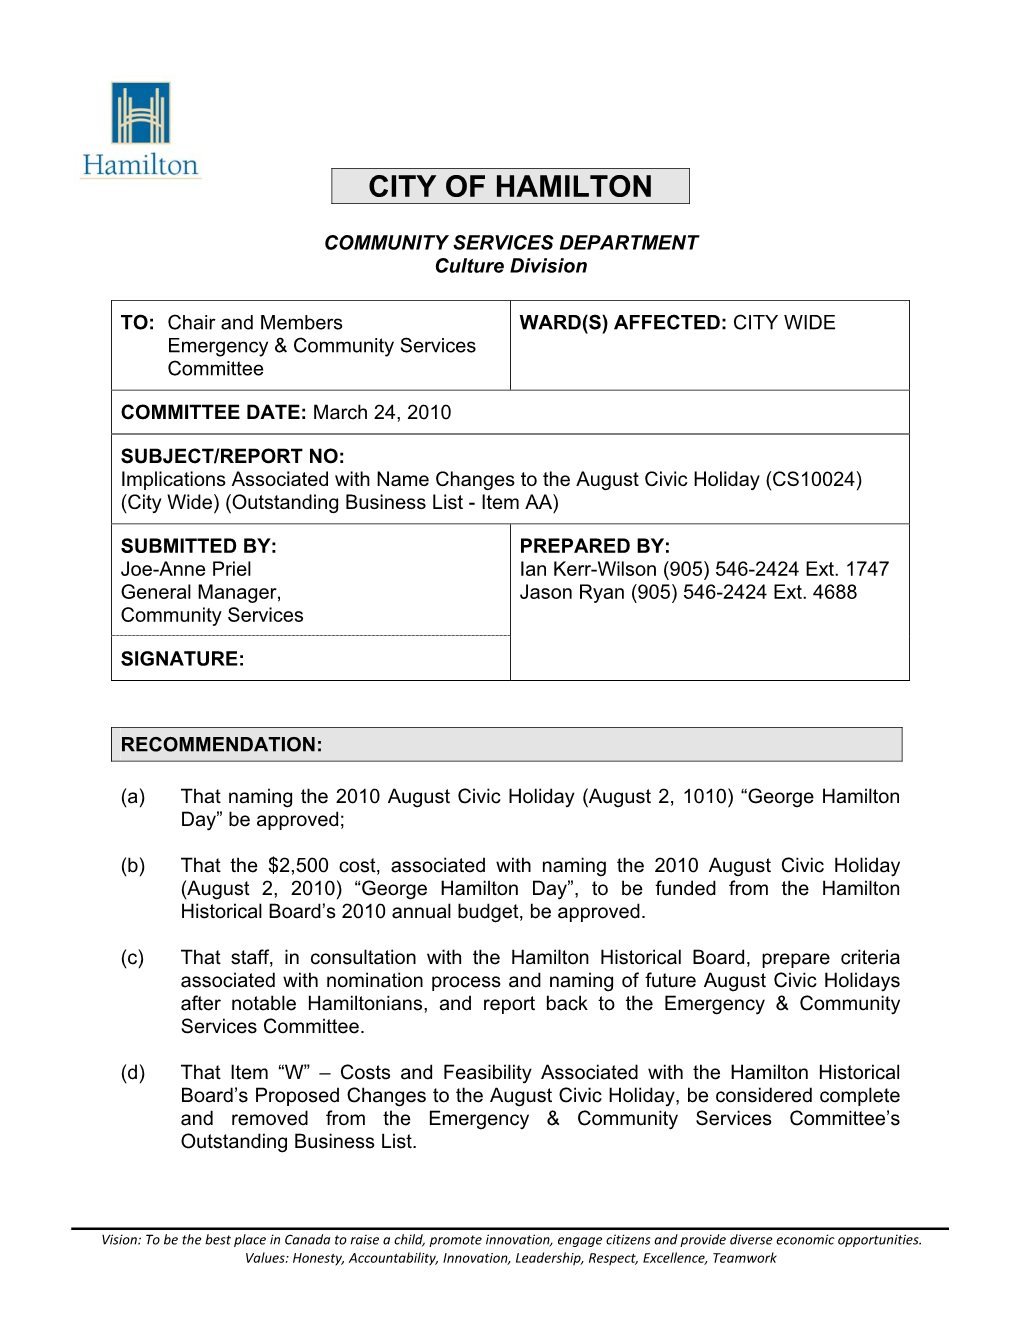 Implications Associated with Name Changes to the August Civic Holiday (CS10024) (City Wide) (Outstanding Business List - Item AA)